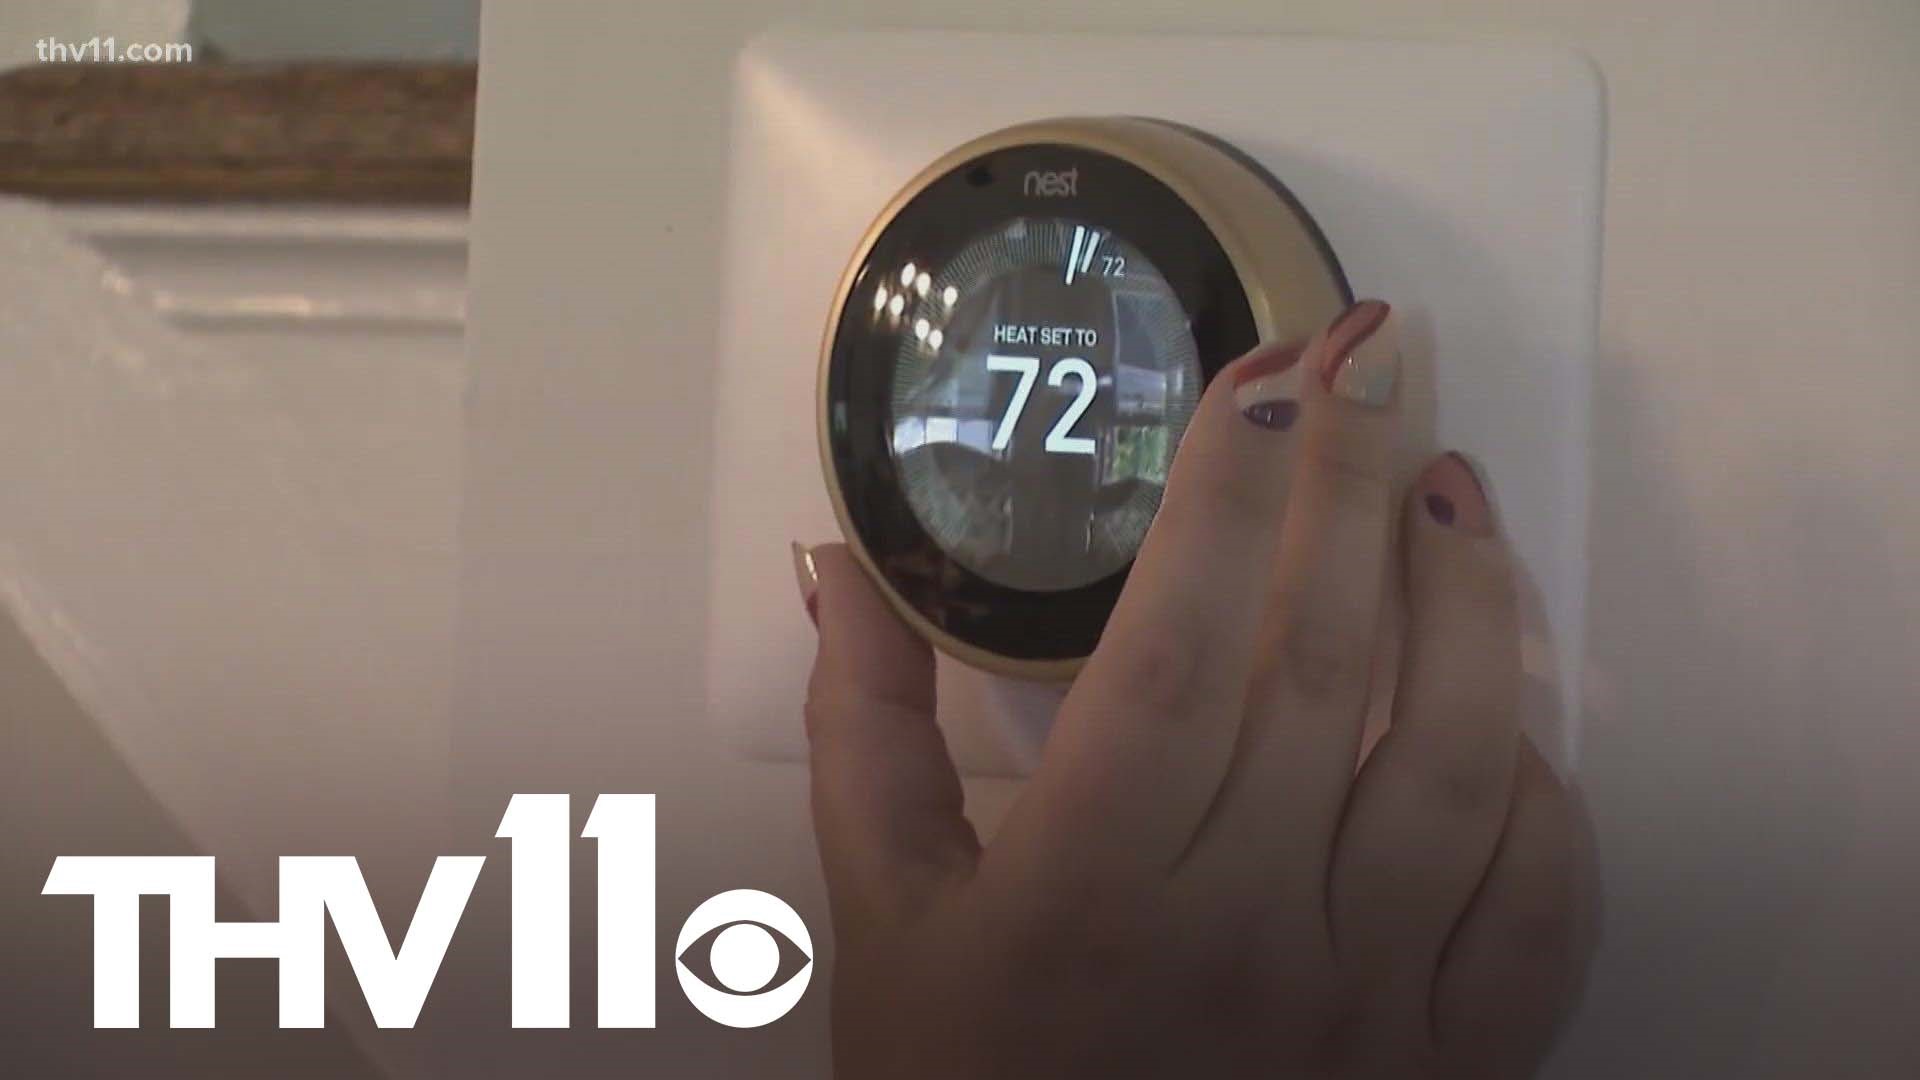 Energy experts are saying that now is the time to start setting aside money for higher heating bills this winter.